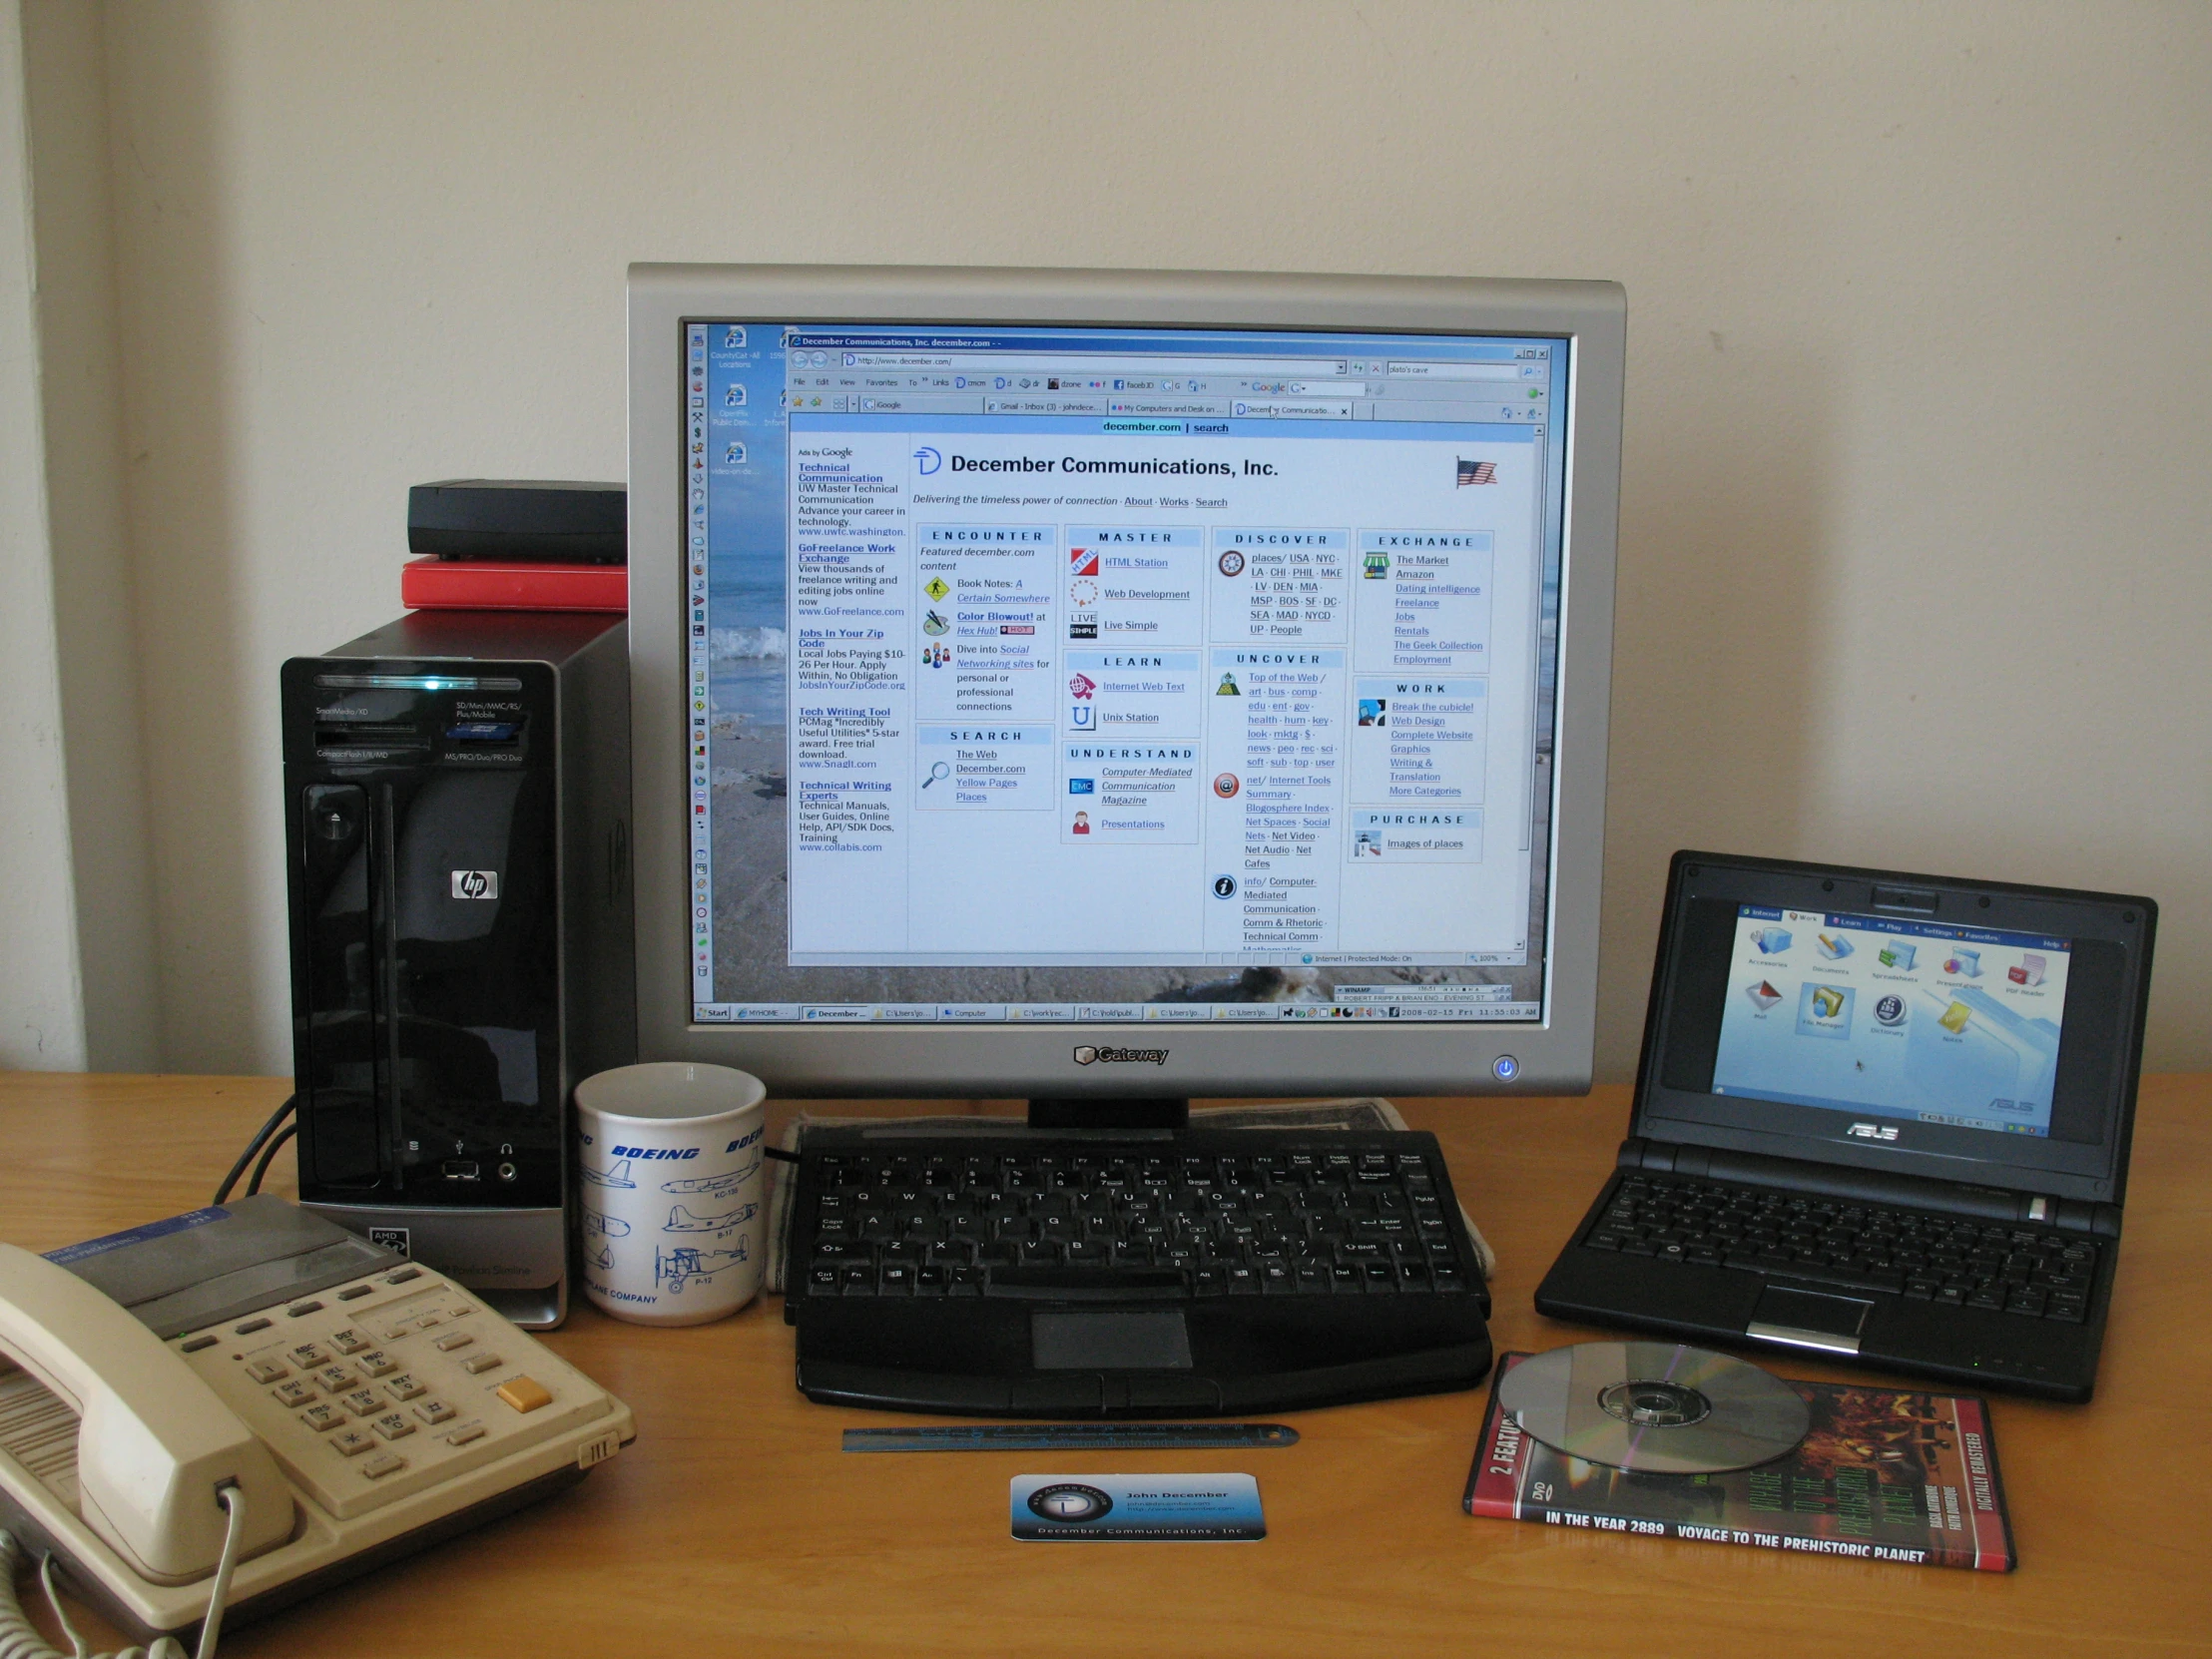 laptop and desktop computer with other electronic items